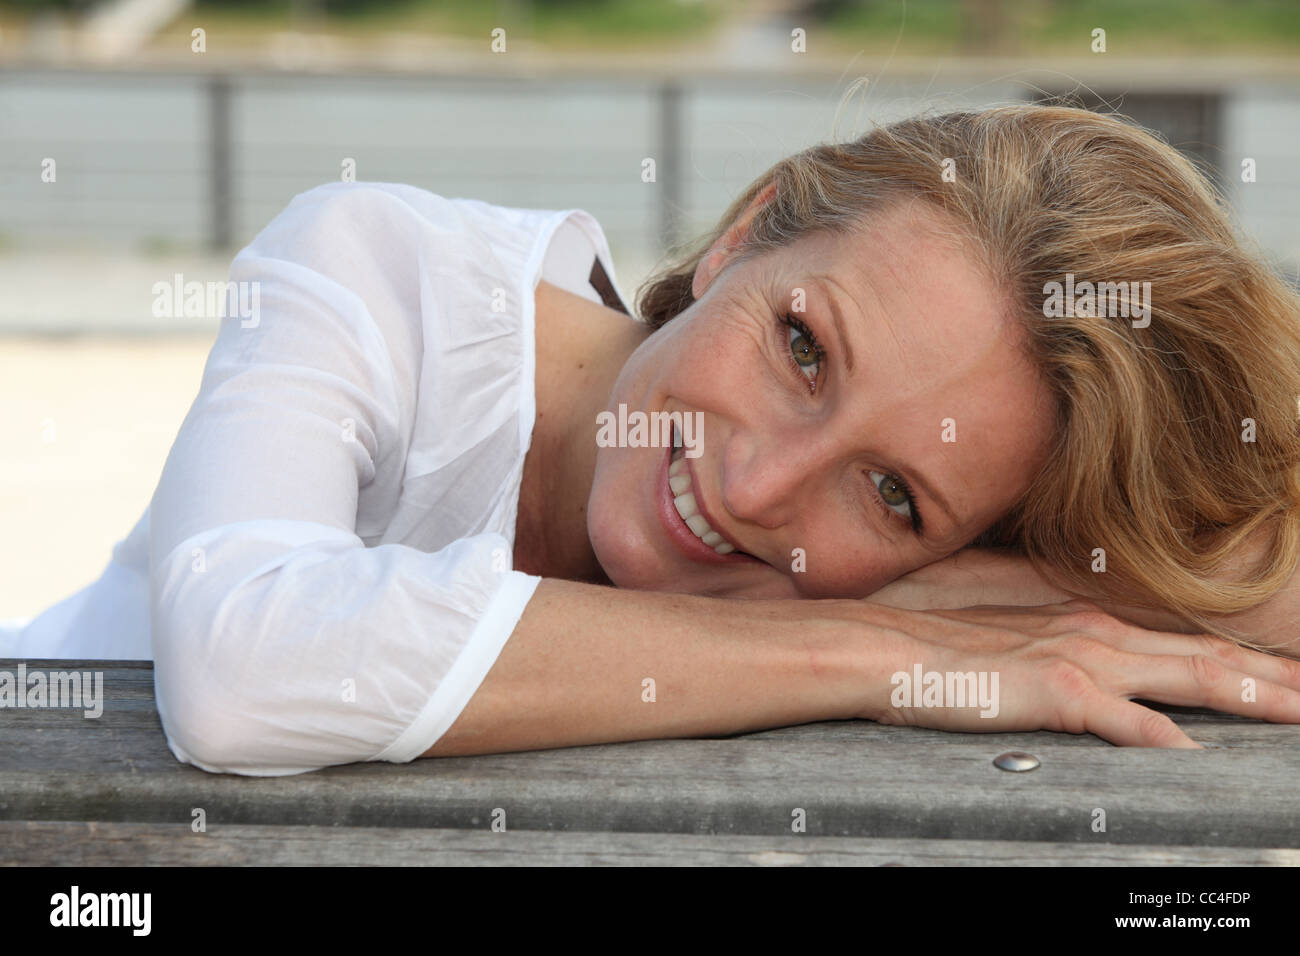 Closeup of a smiling woman sitting outdoors Stock Photo